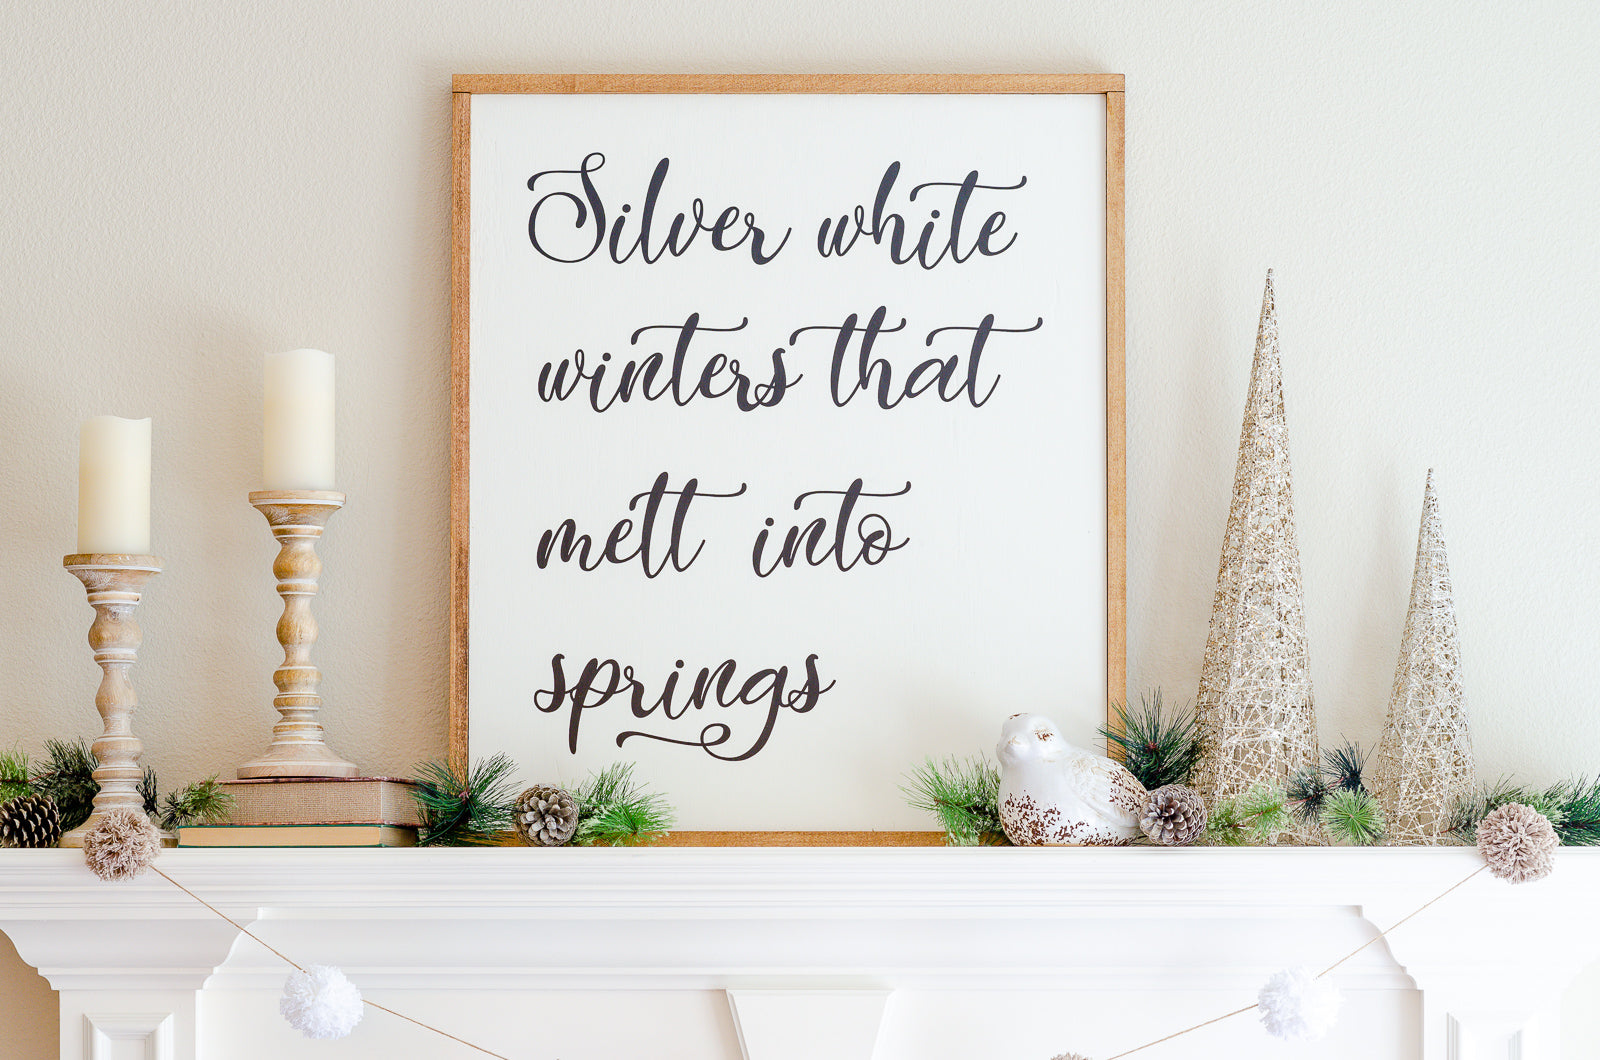 Farmhouse style mantel sign made with Cameo cutting machine. Text on sign reads "Silver white winters that melt into springs"